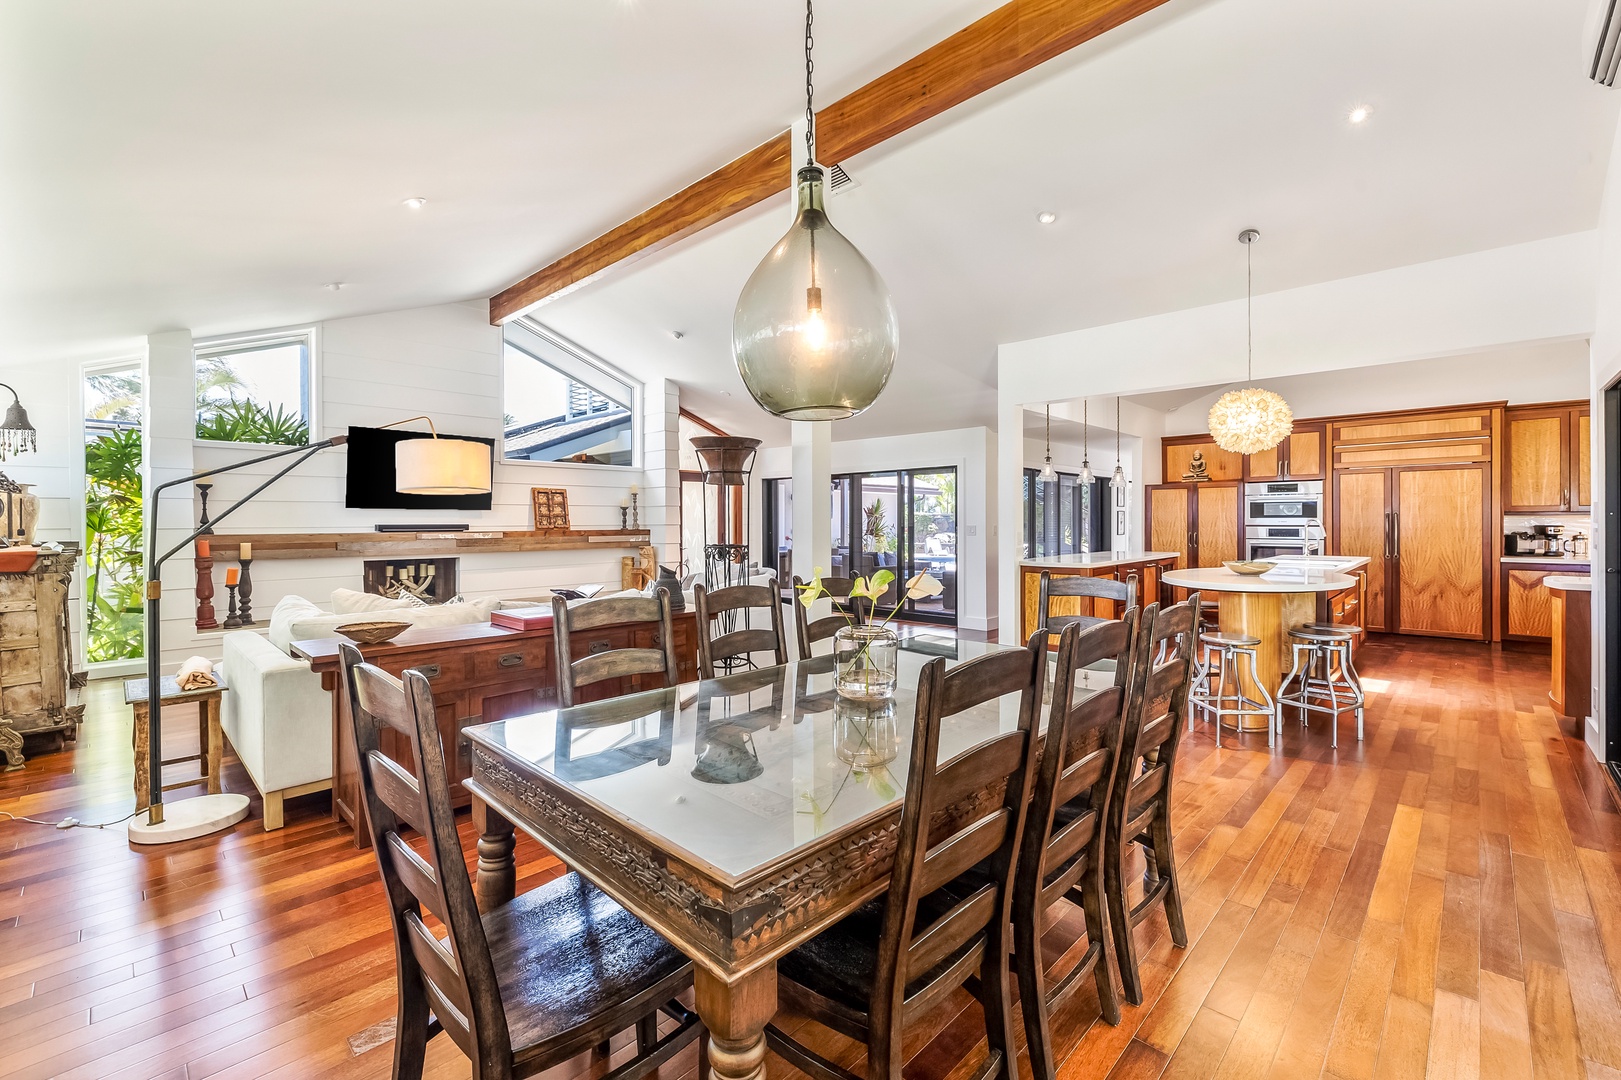 Kailua Vacation Rentals, Hale Ohana - The dining area openly flows to the main living area and kitchen